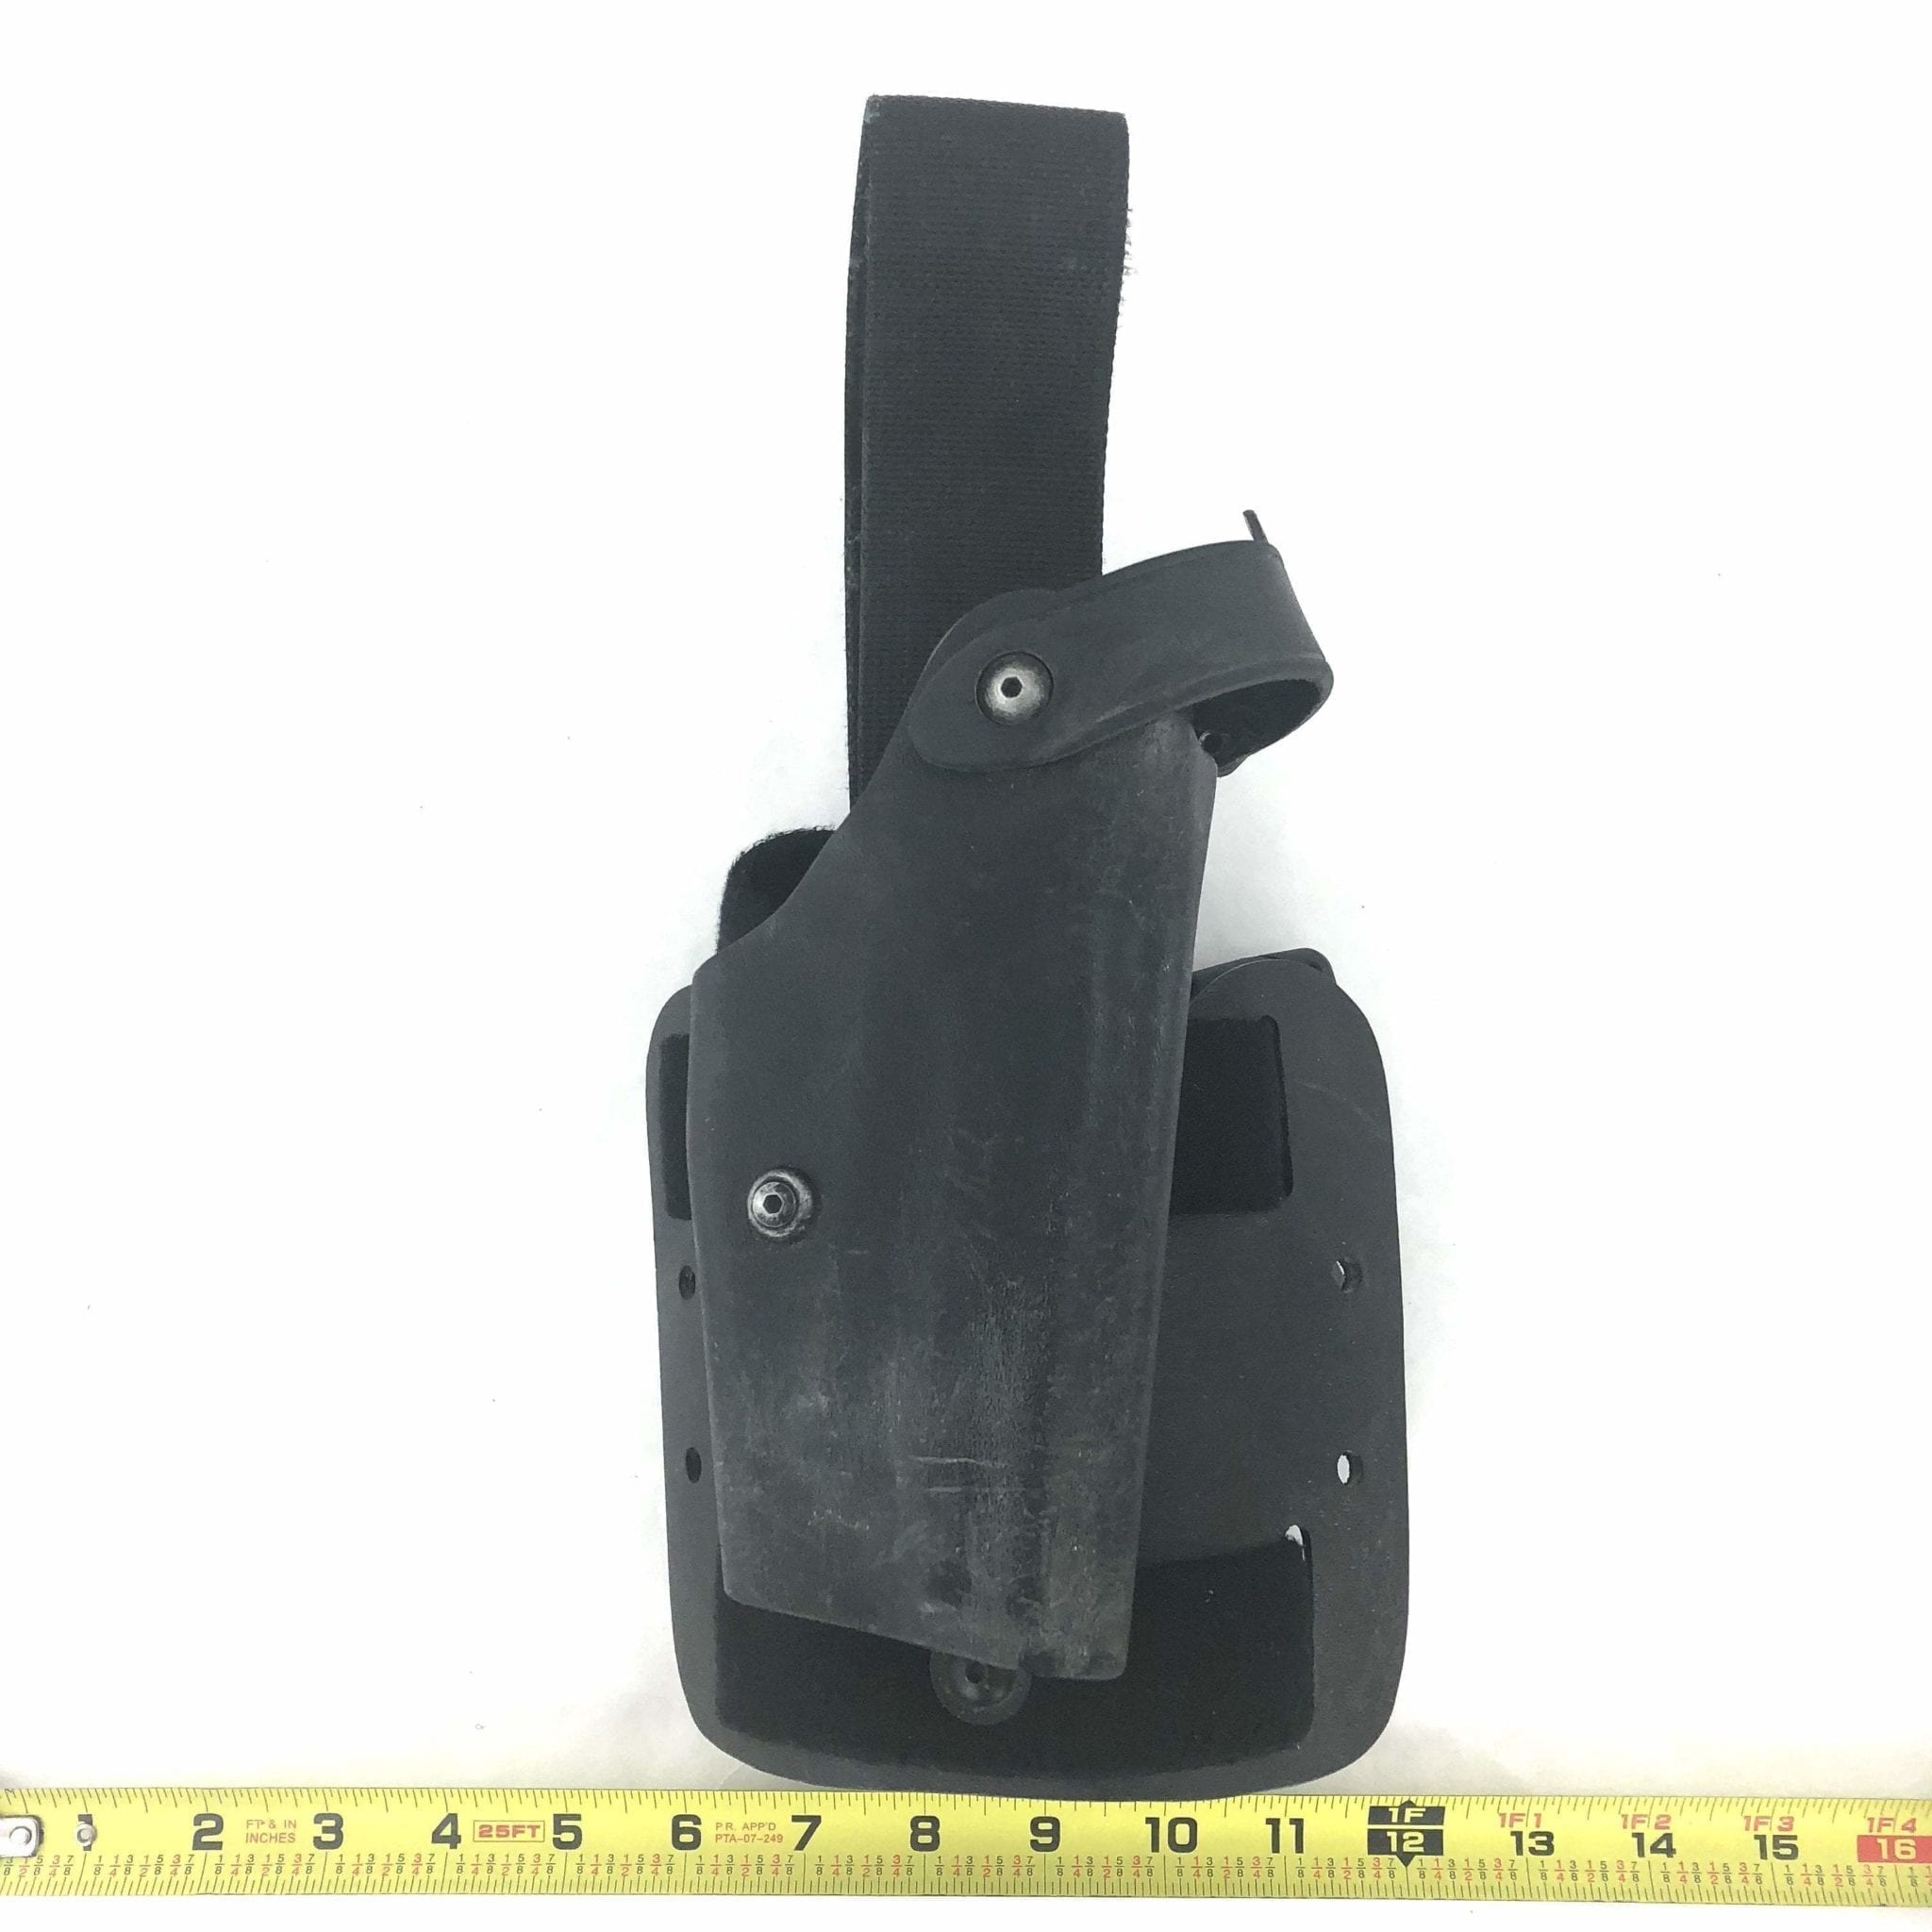 Used Safariland SLS Holster Model 6004-77, For SIG 226 and 220